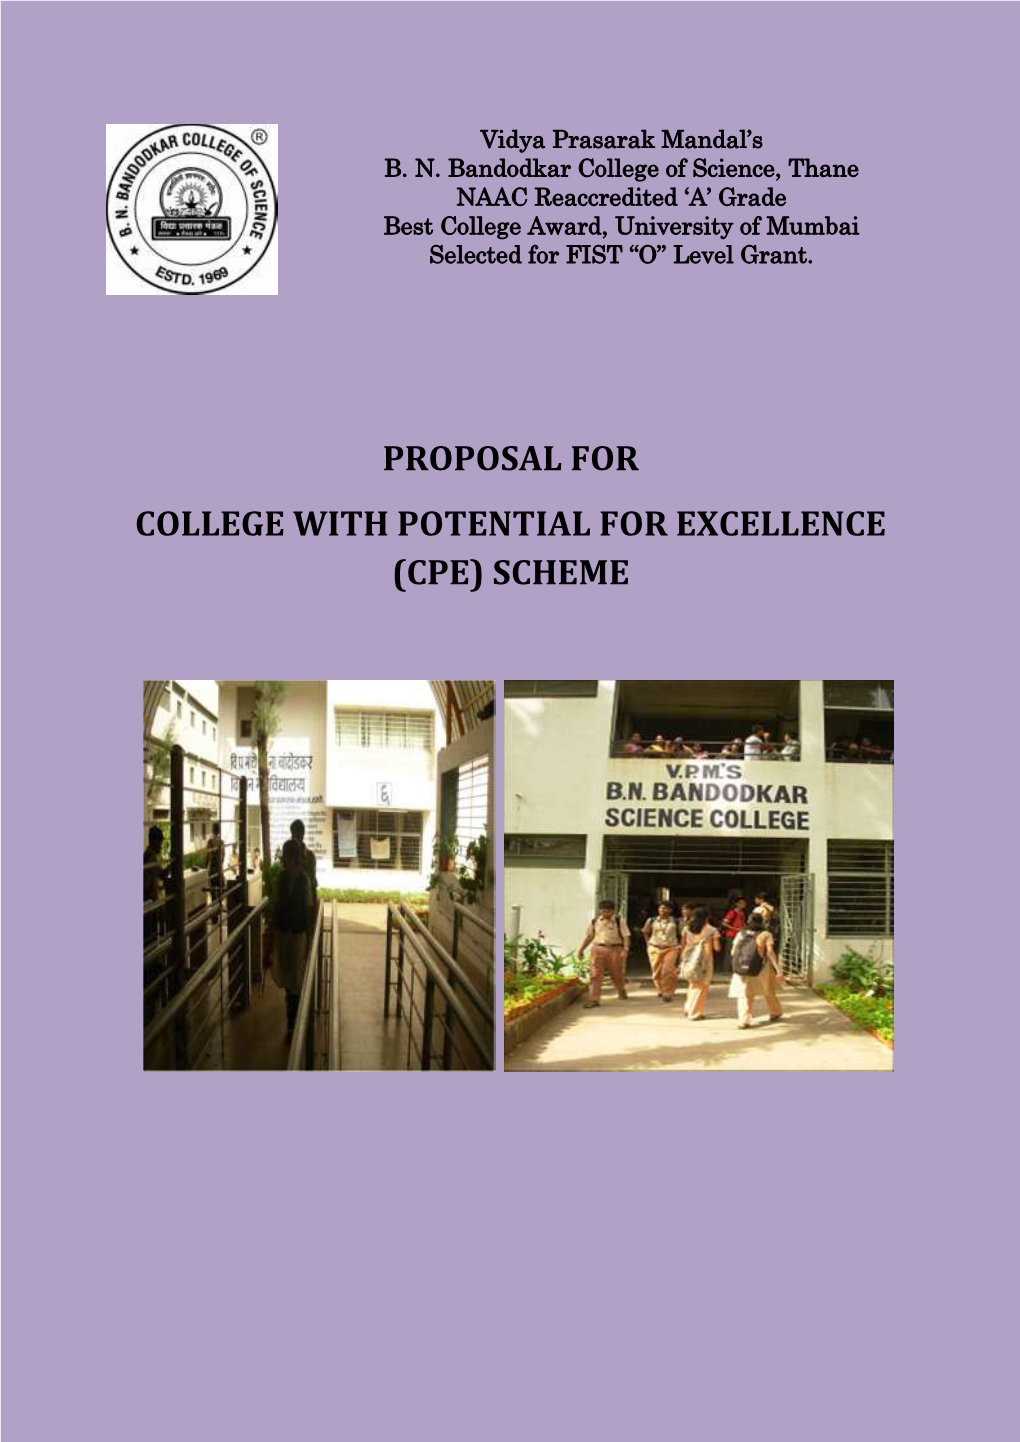 Proposal for College with Potential for Excellence (Cpe) Scheme